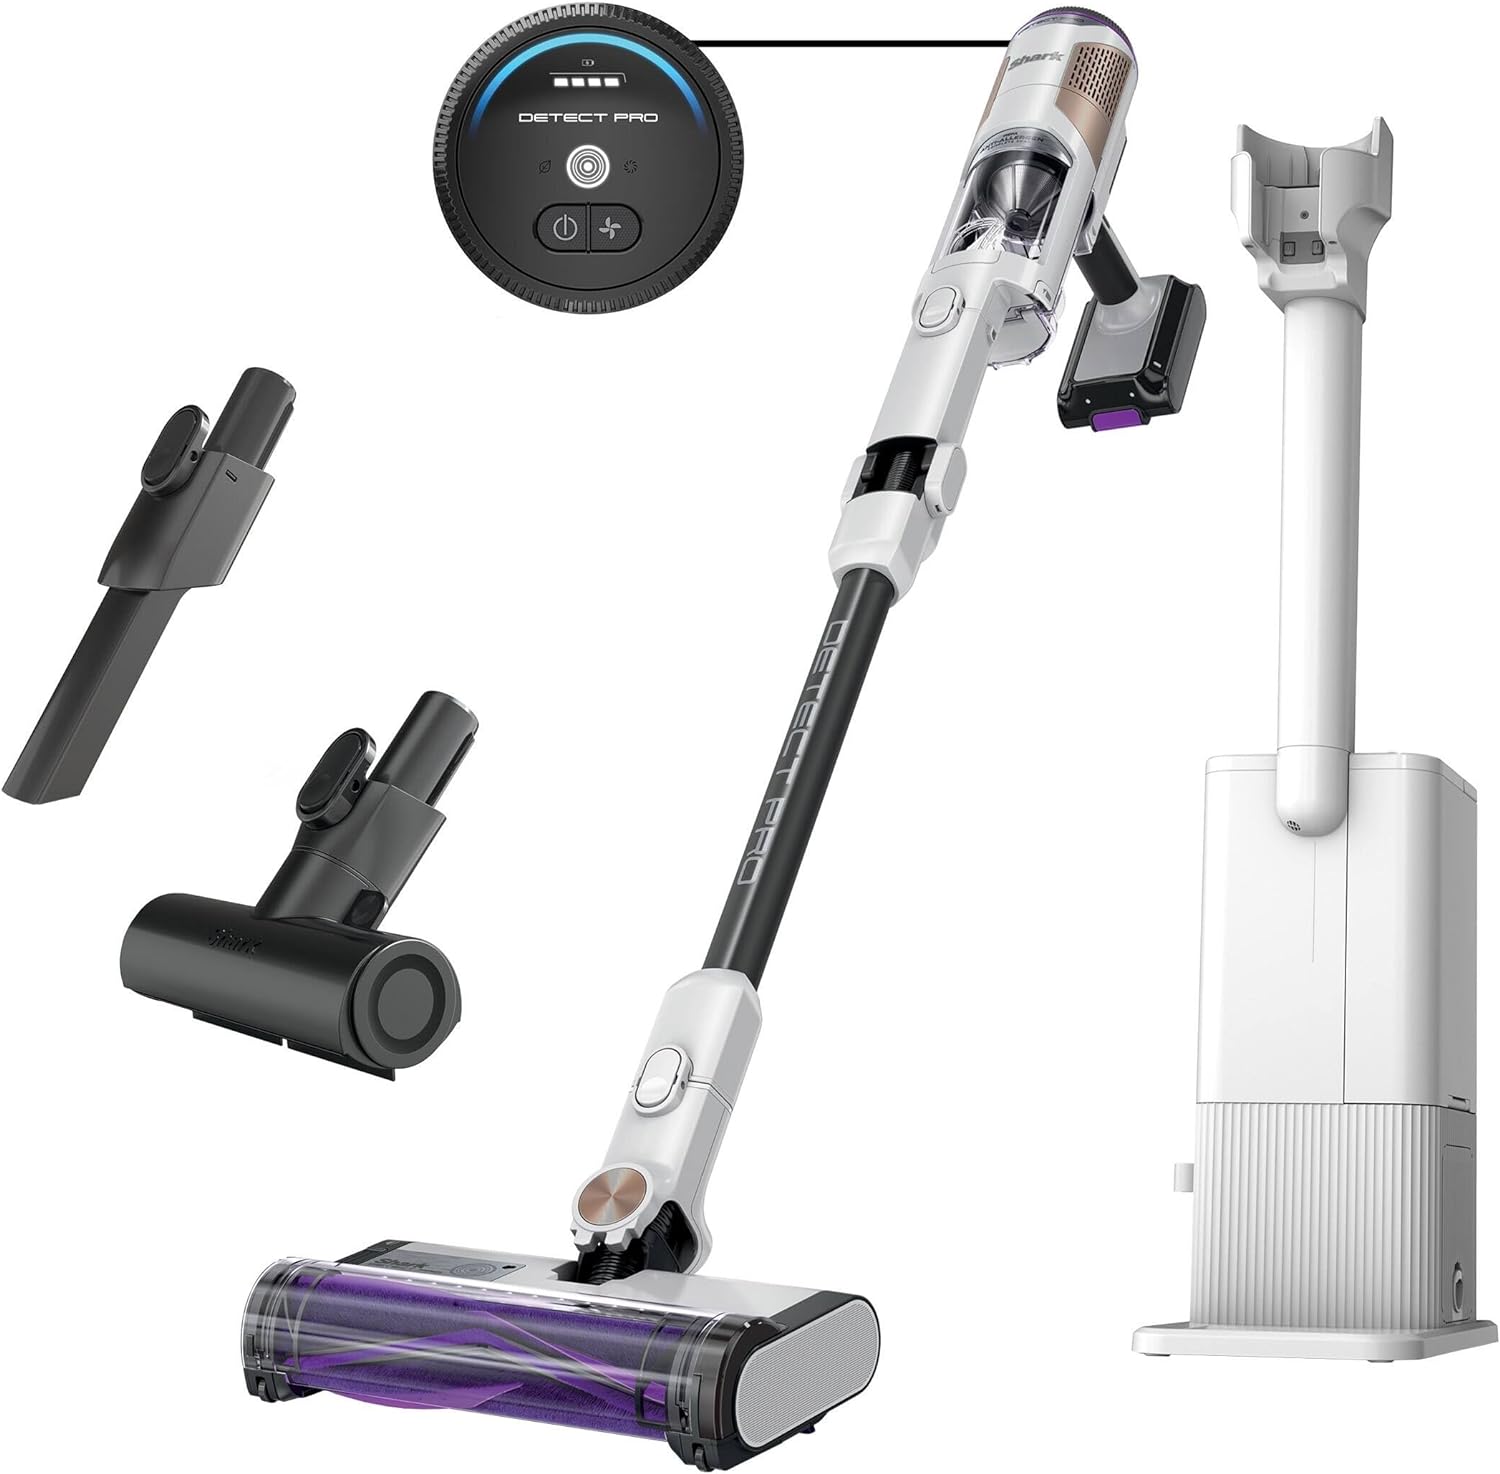 Shark IW3615 Detect Pro Cordless Stick Vacuum with HEPA Auto-Empty System, Flexible Wand, Portable Handheld Attachment, 60 Minute Runtime (Refurbished)